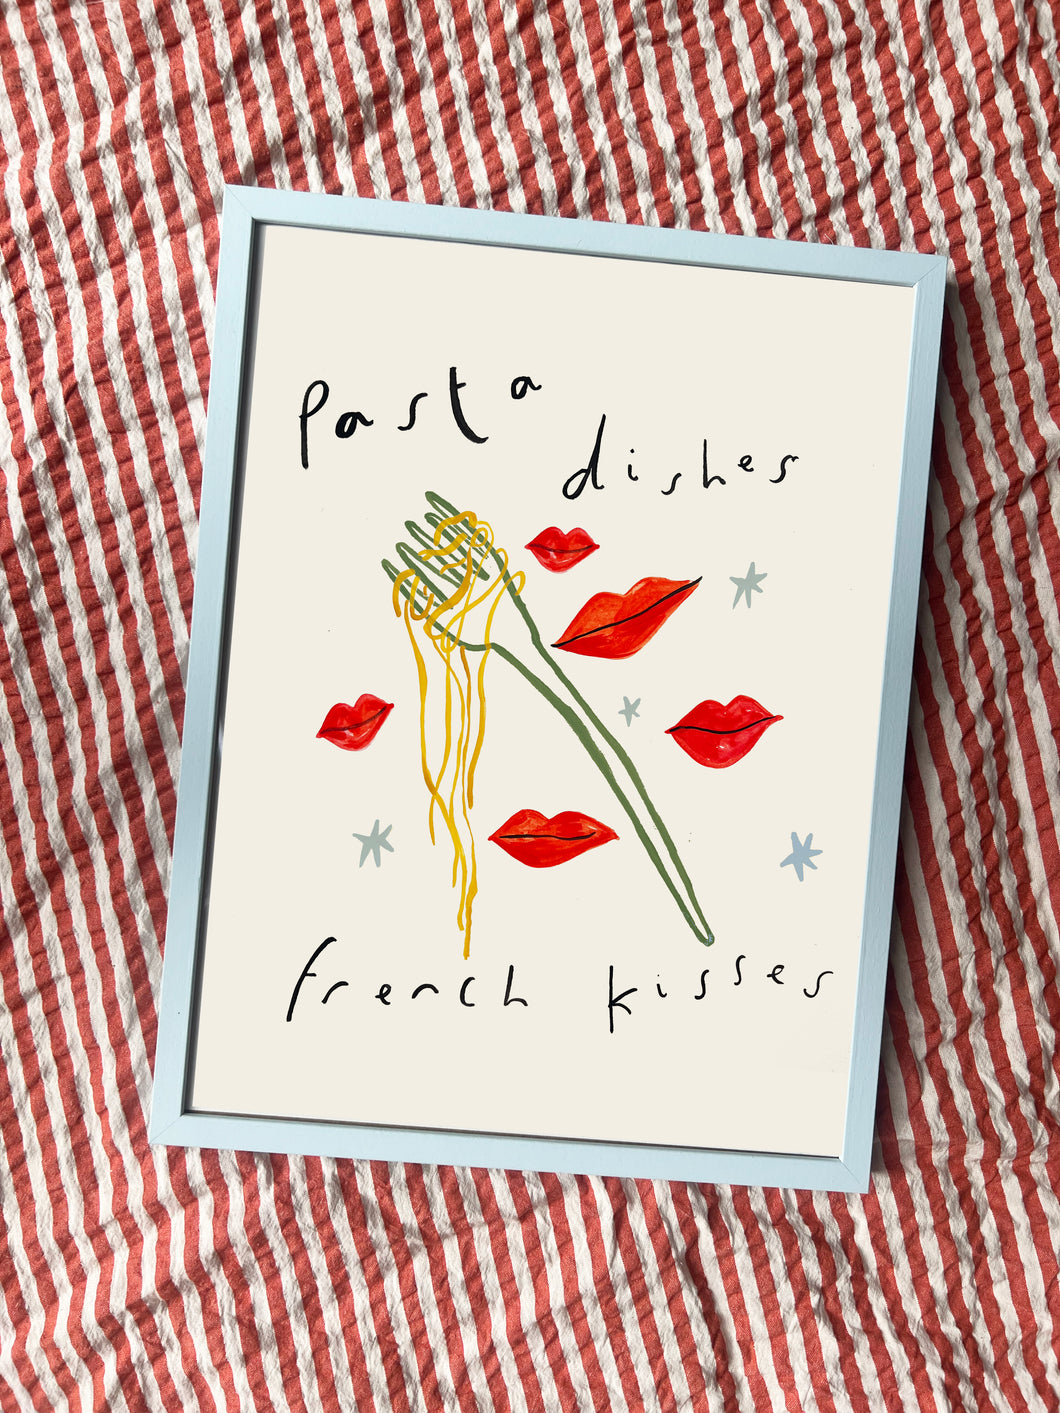 Pasta dishes & french kisses